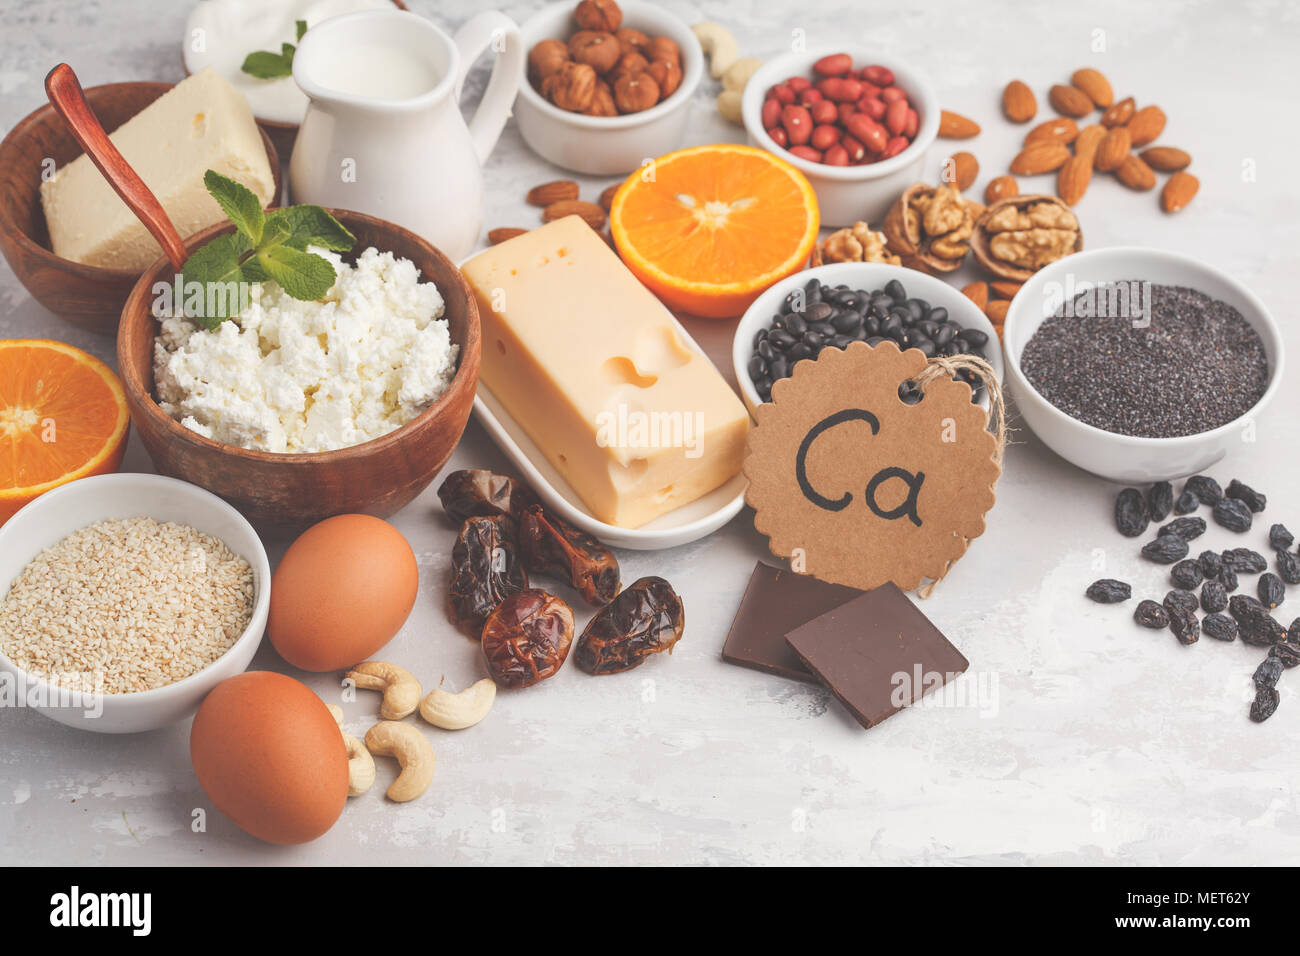 Healthy food nutrition dieting concept. Assortment of high calcium sources. Dairy products, legumes, eggs, nuts, chocolate, poppy, sesame, chocolate. Stock Photo